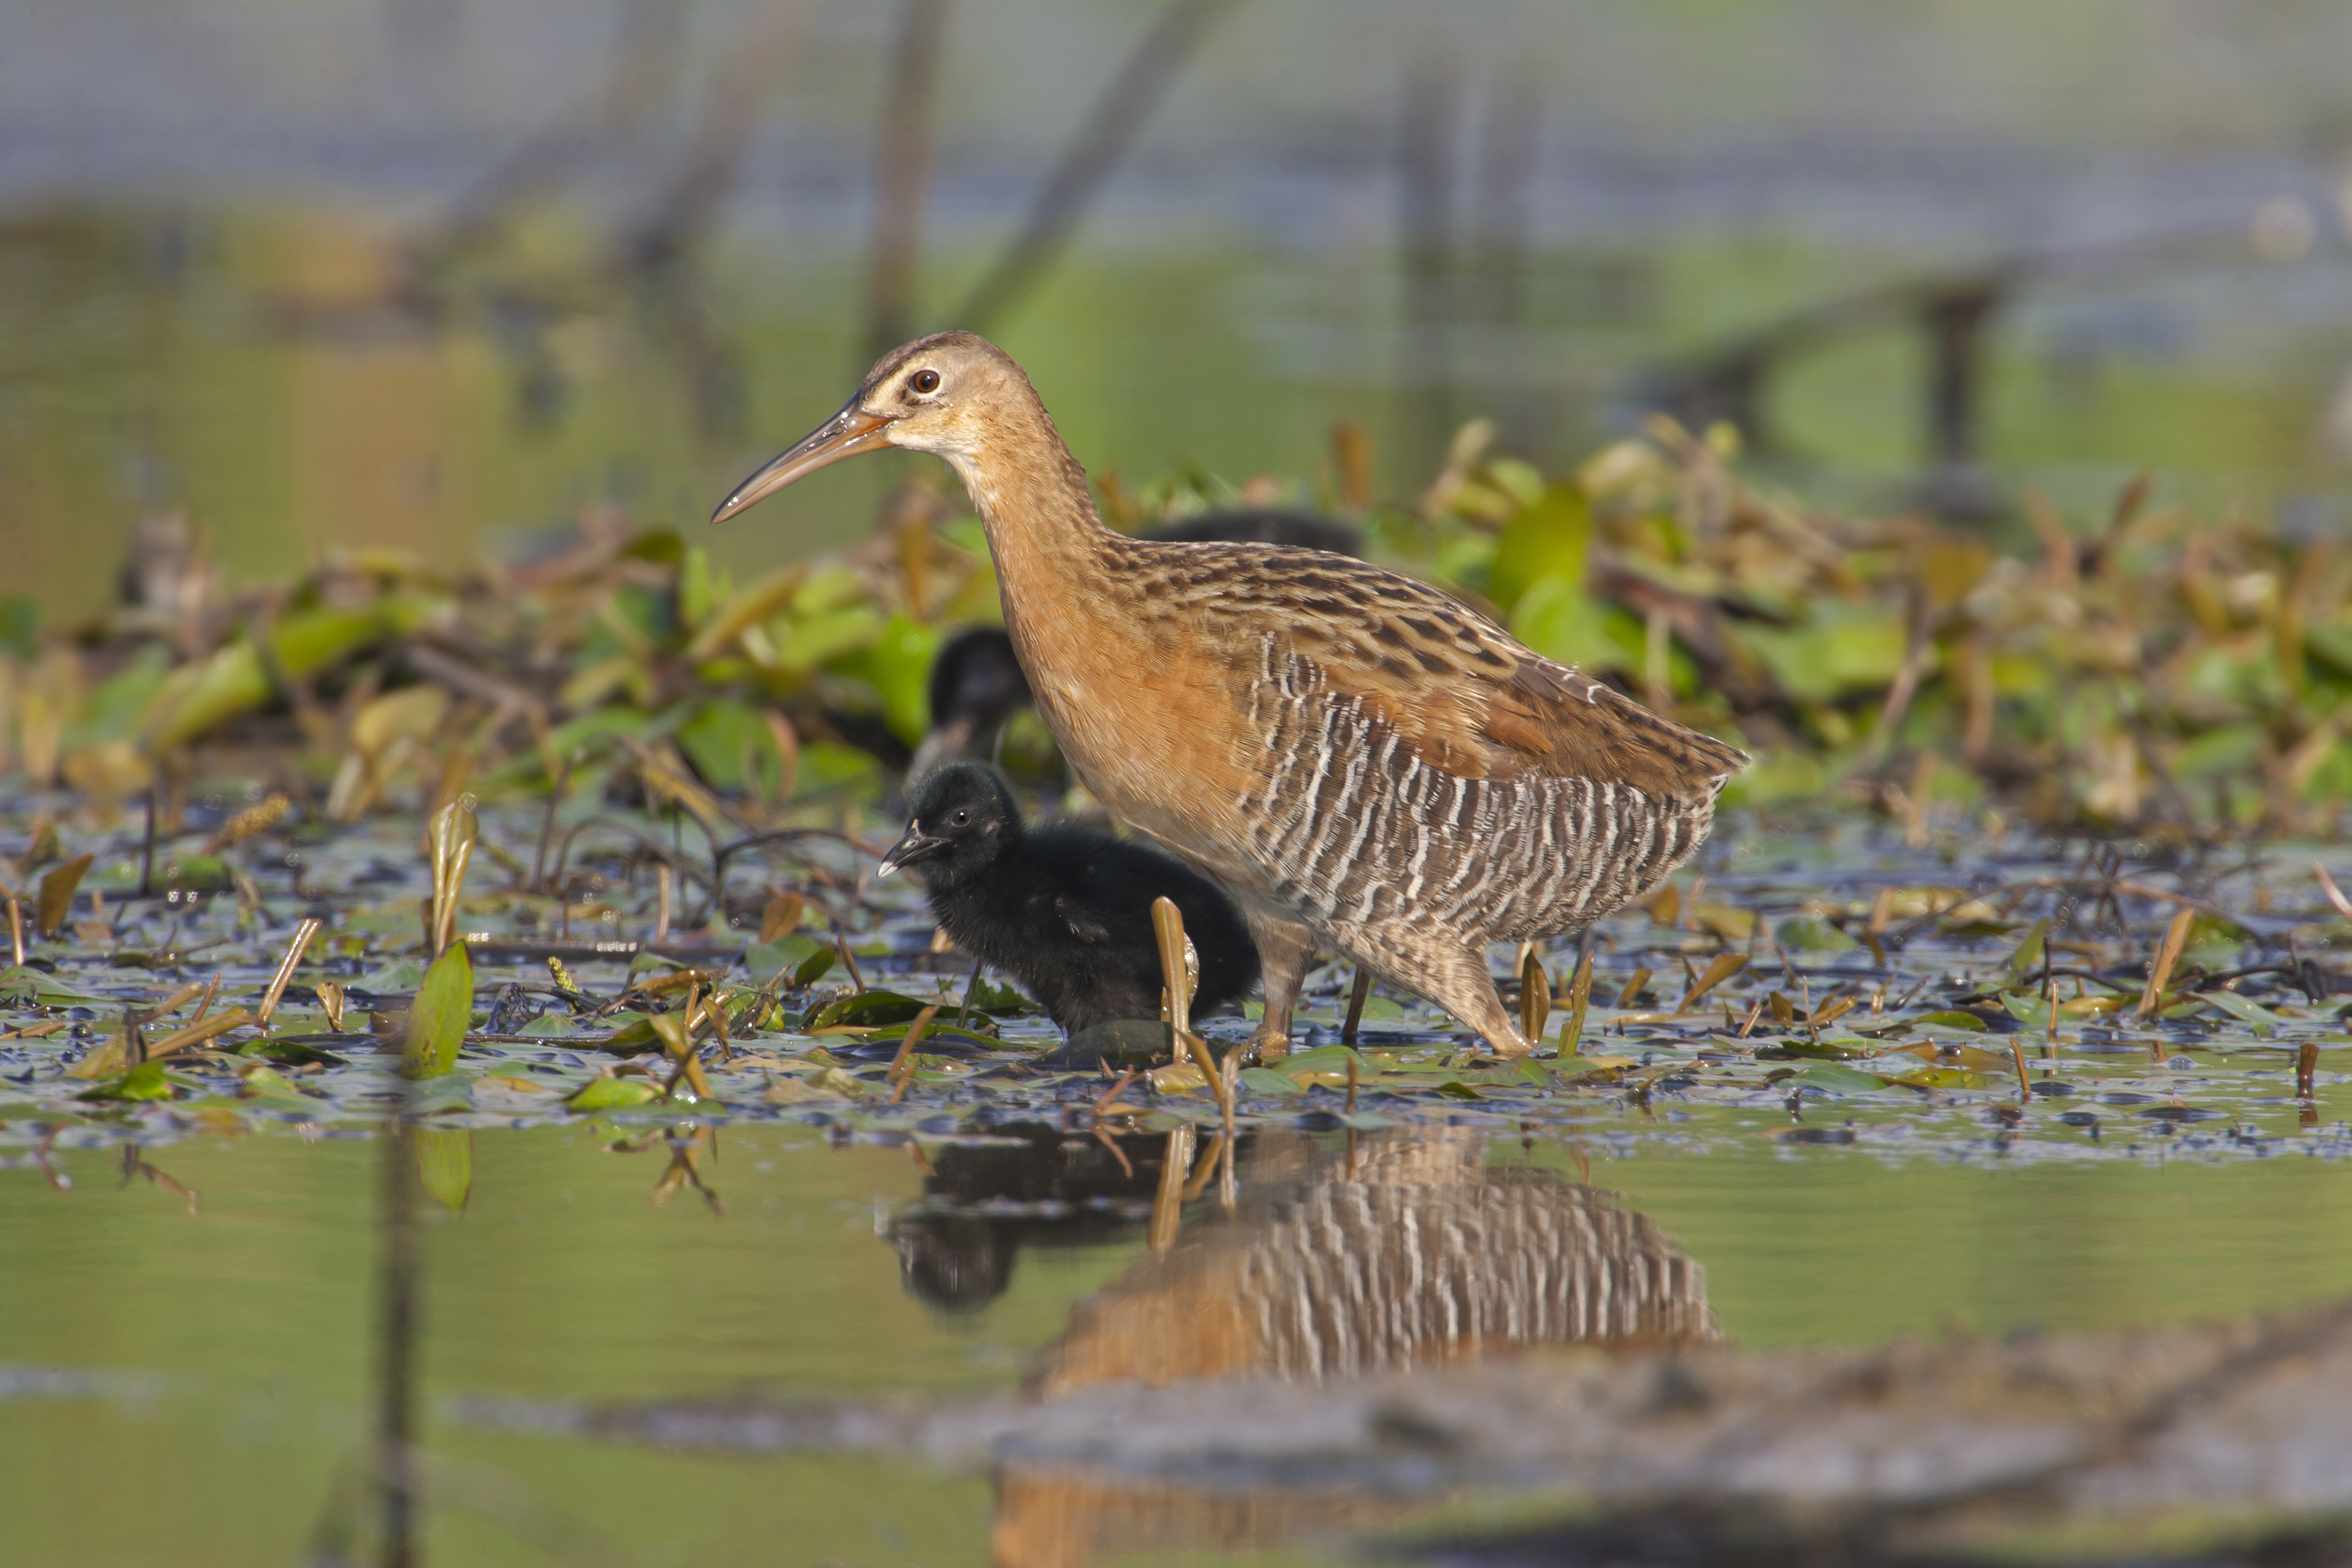 Photograph of an adult King Rail with a chick wading in a wetland